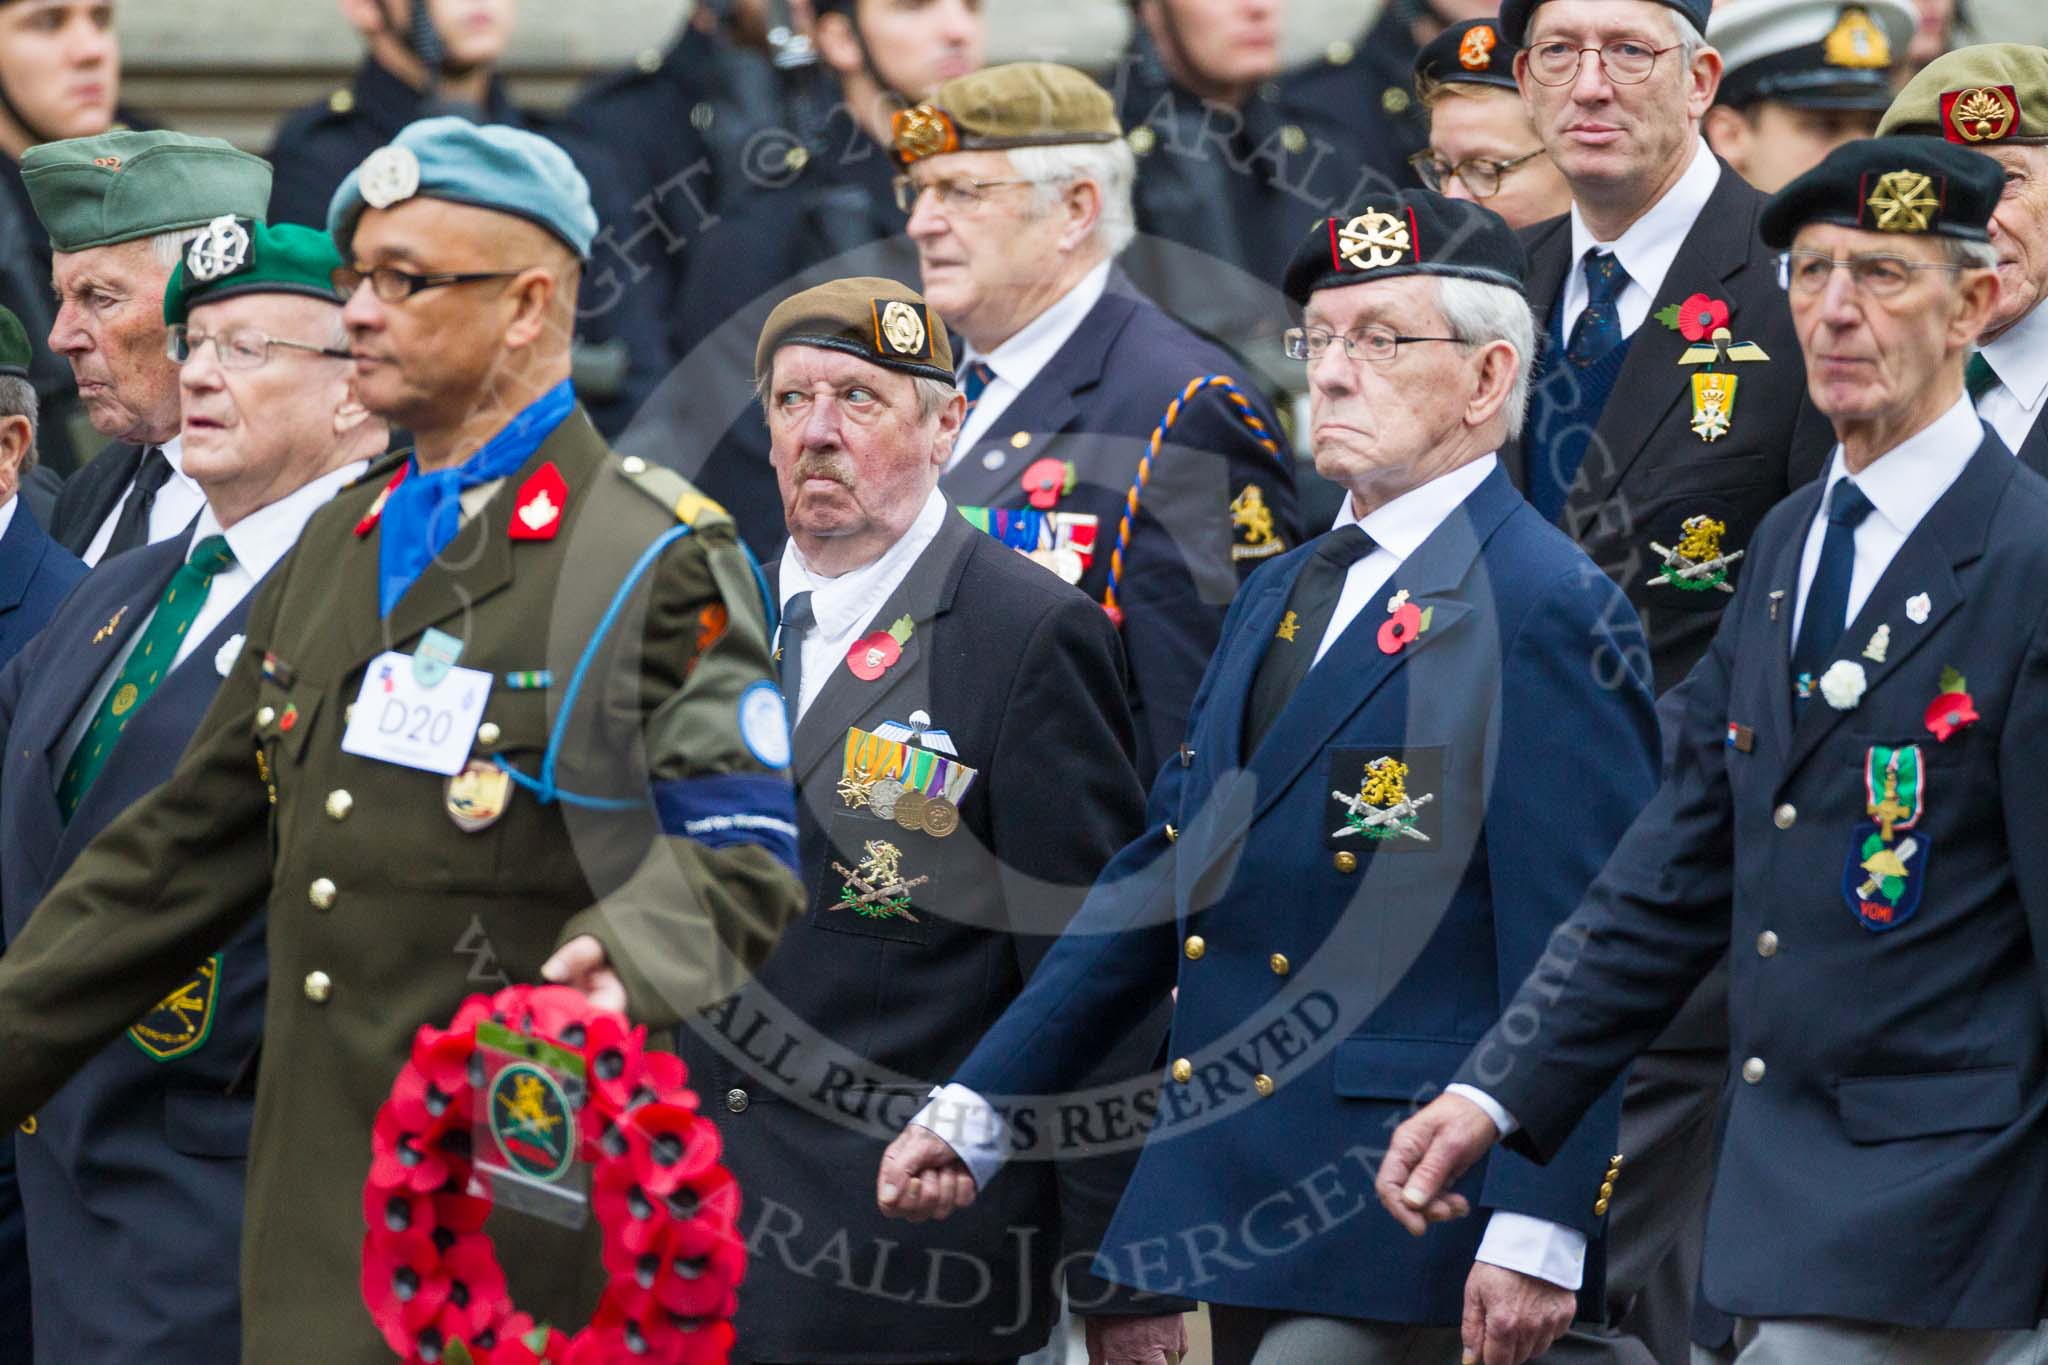 Remembrance Sunday at the Cenotaph 2015: Group D20, Bond Van Wapenbroeders.
Cenotaph, Whitehall, London SW1,
London,
Greater London,
United Kingdom,
on 08 November 2015 at 11:55, image #713